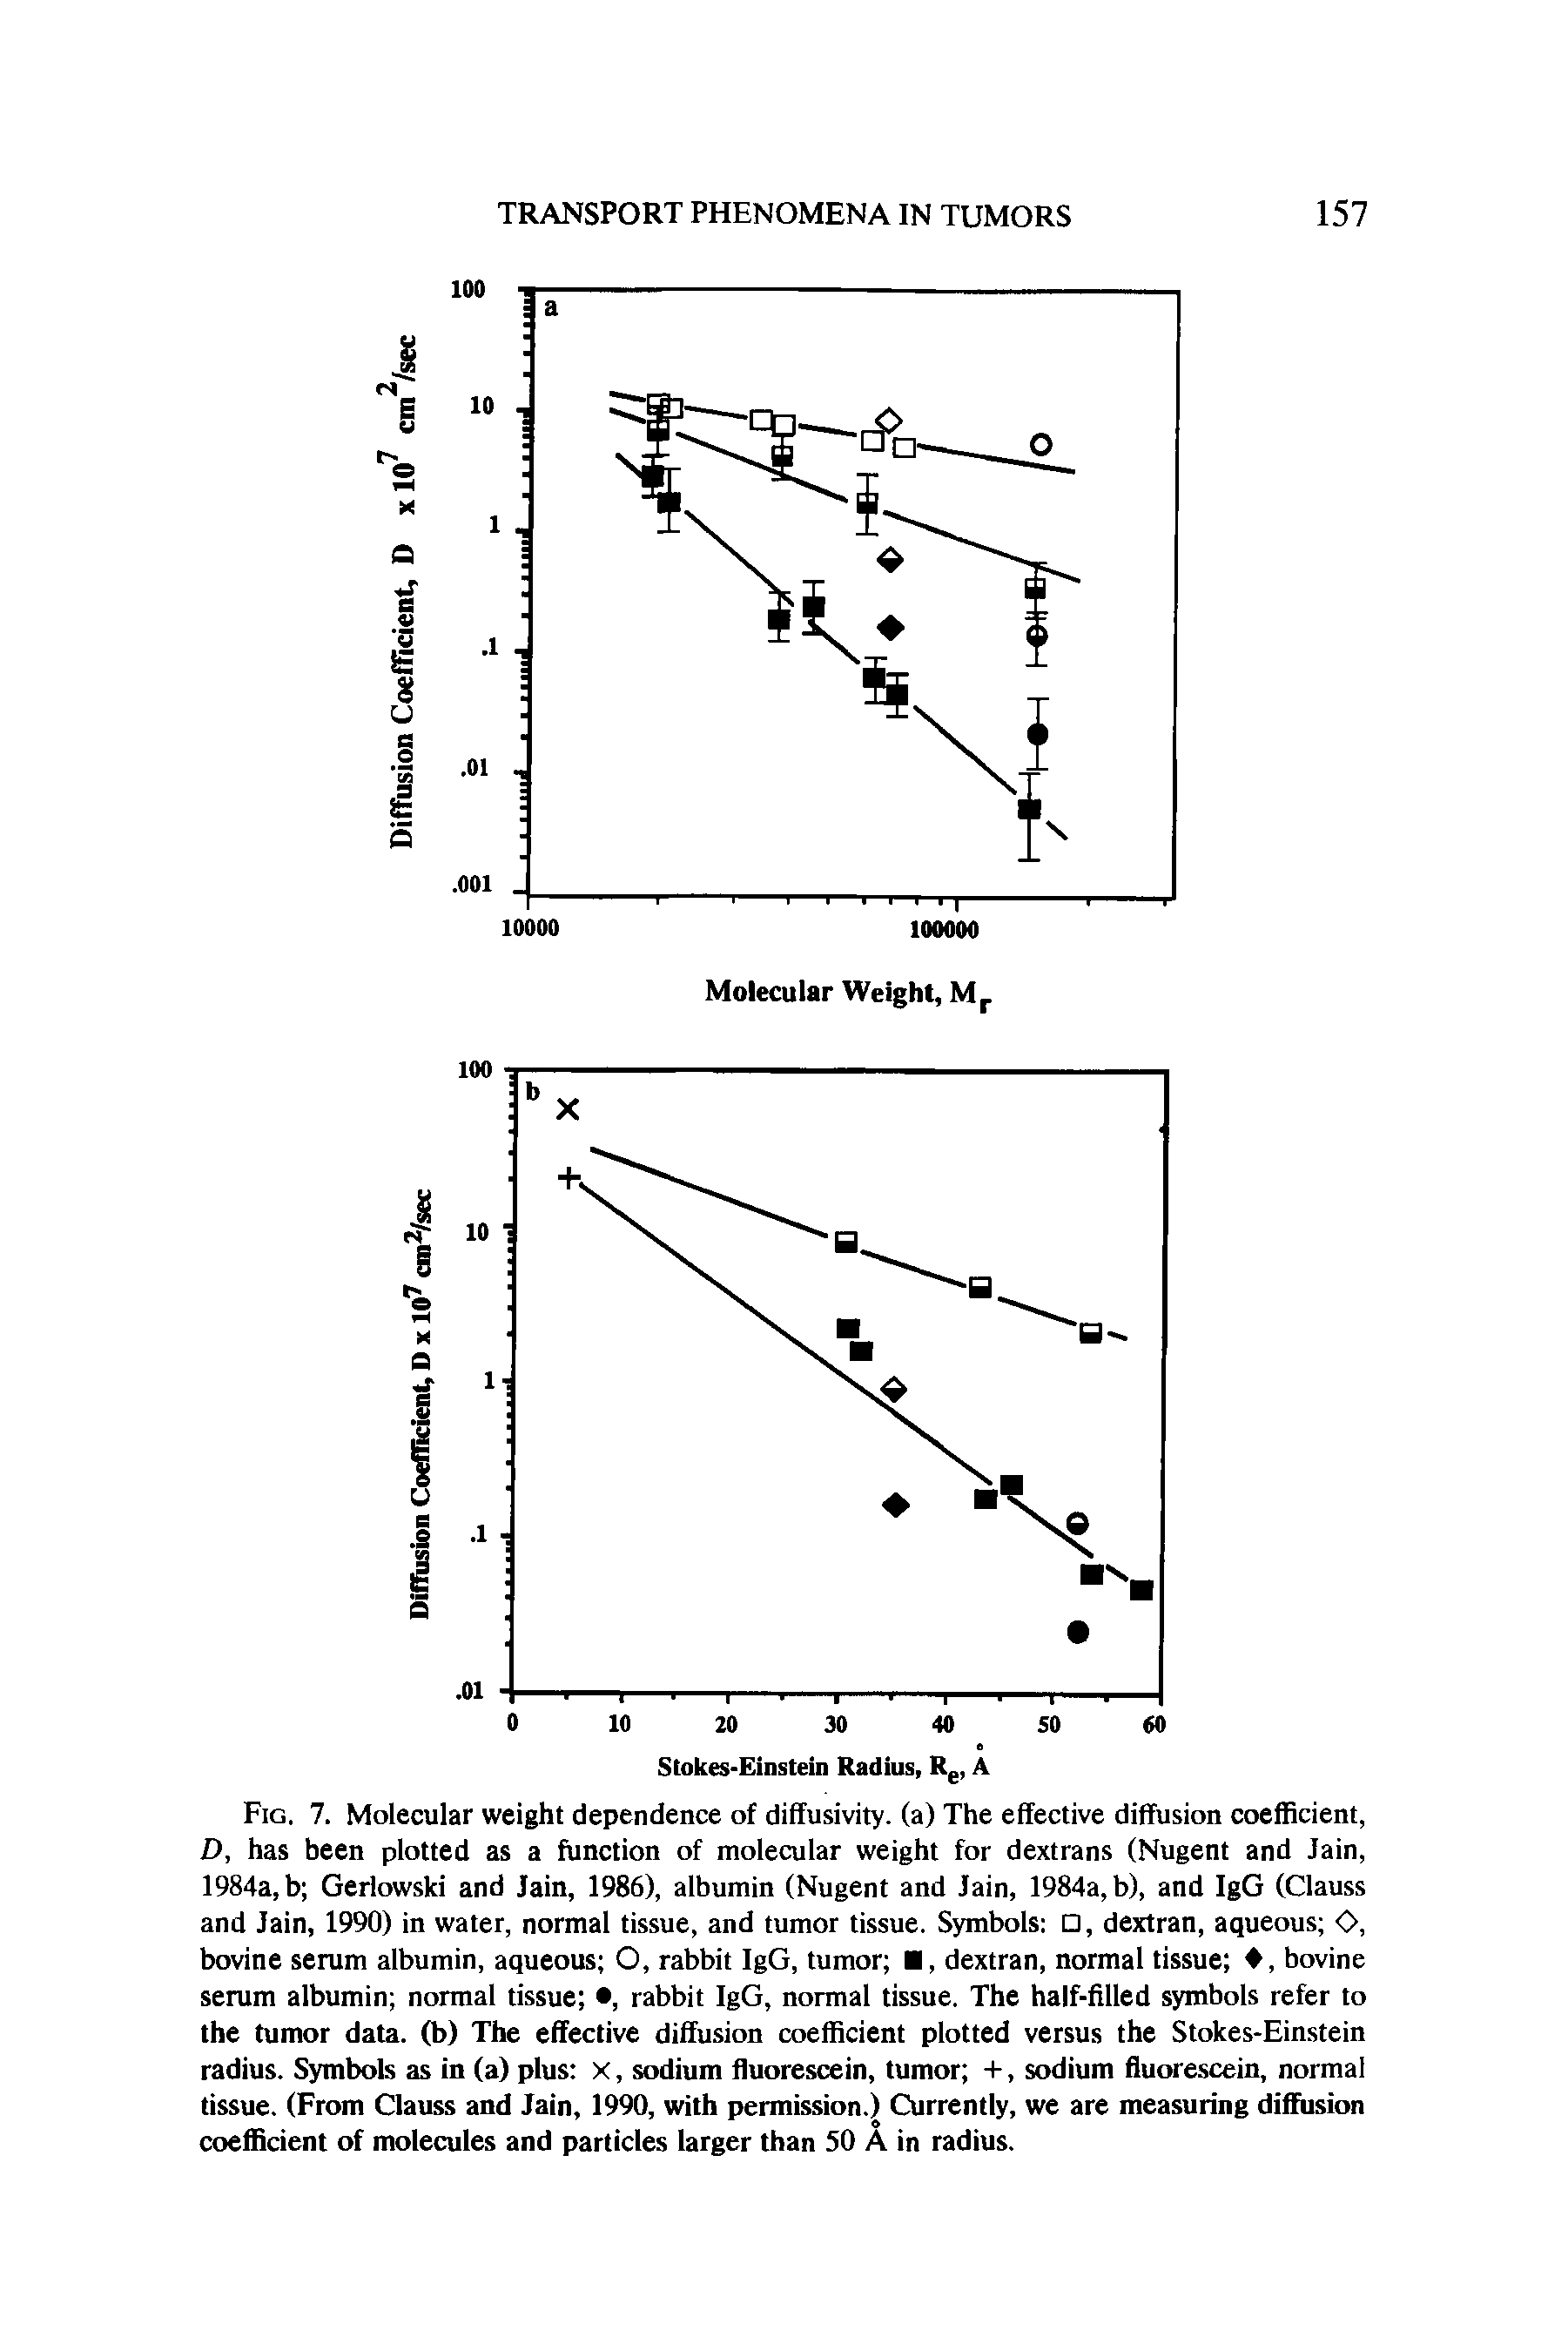 Fig. 7. Molecular weight dependence of diffusivity. (a) The effective diffusion coefficient, D, has been plotted as a function of molecular weight for dextrans (Nugent and Jain, 1984a, b Gerlowski and Jain, 1986), albumin (Nugent and Jain, 1984a, b), and IgG (Clauss and Jain, 1990) in water, normal tissue, and tumor tissue. Symbols , dextran, aqueous O, bovine serum albumin, aqueous O, rabbit IgG, tumor , dextran, normal tissue , bovine serum albumin normal tissue , rabbit IgG, normal tissue. The half-filled symbols refer to the tumor data, (b) The effective diffusion coefficient plotted versus the Stokes-Einstein radius. Symbols as in (a) plus X, sodium fluorescein, tumor +, sodium fluorescein, normal tissue. (From Clauss and Jain, 1990, with permission.) Currently, we are measuring diffusion coefficient of molecules and particles larger than 50 A in radius.